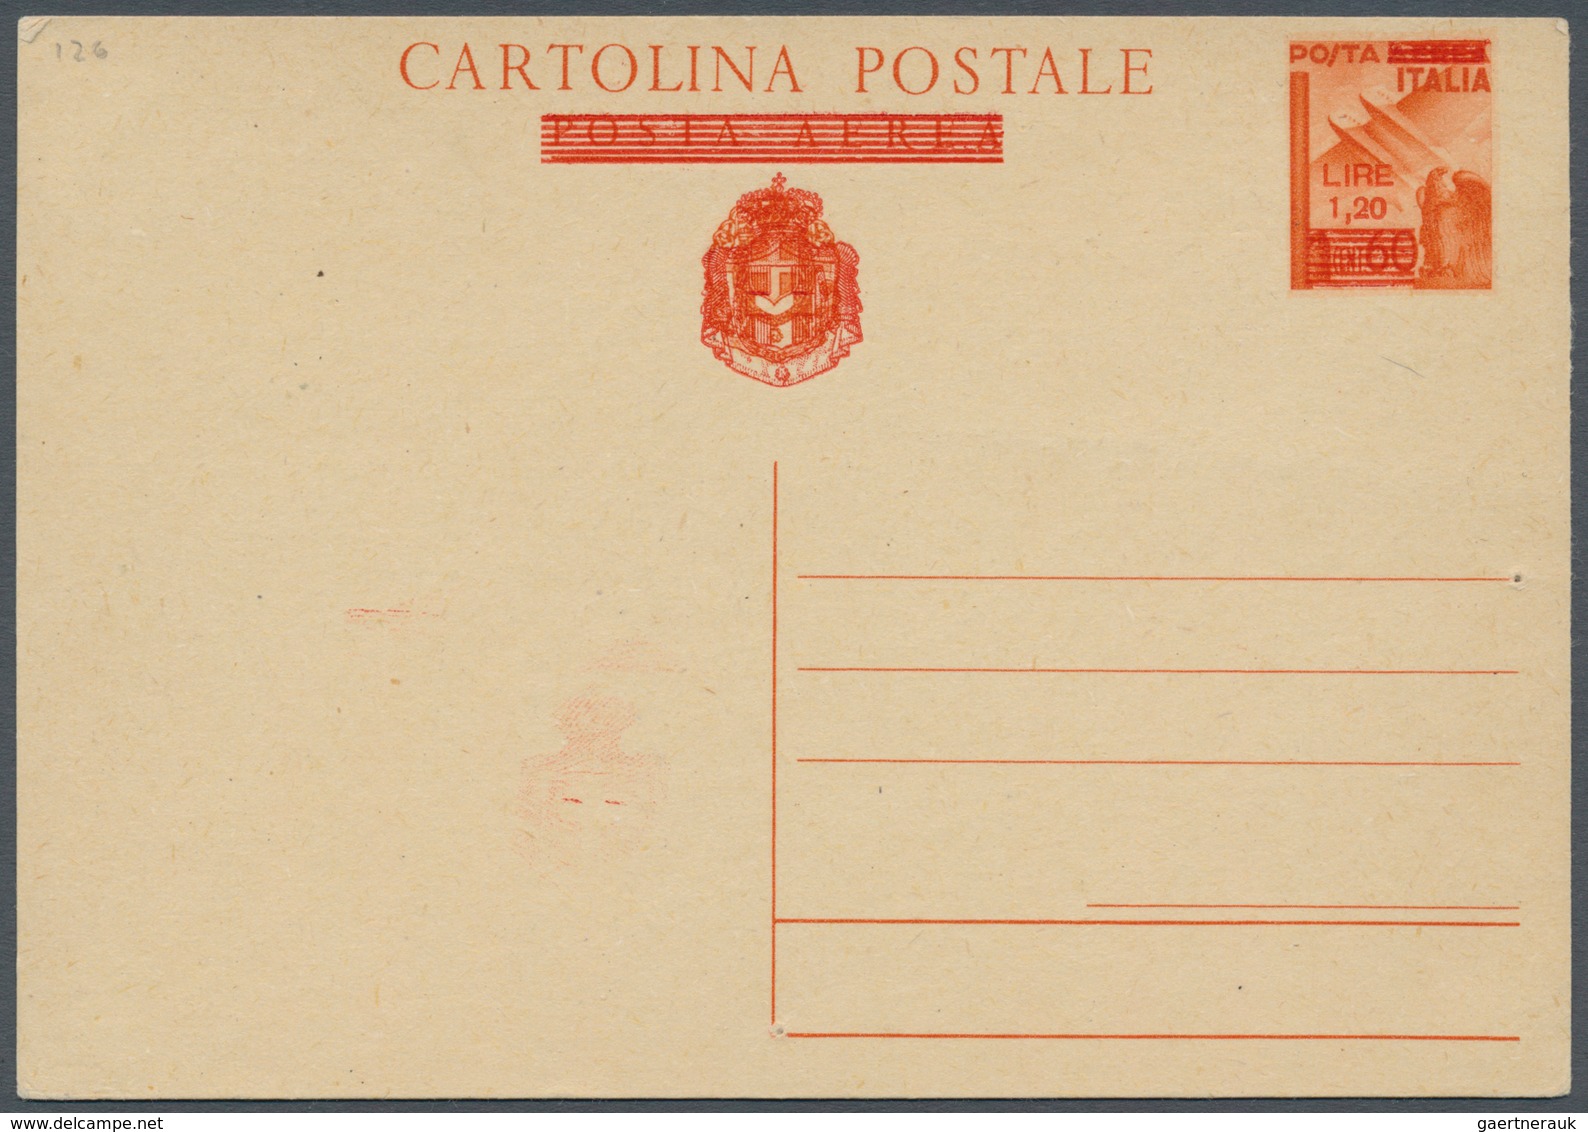 Italien - Ganzsachen: 1943-1945, air mail postal stationery cards, unused, complete set of 6 cards (